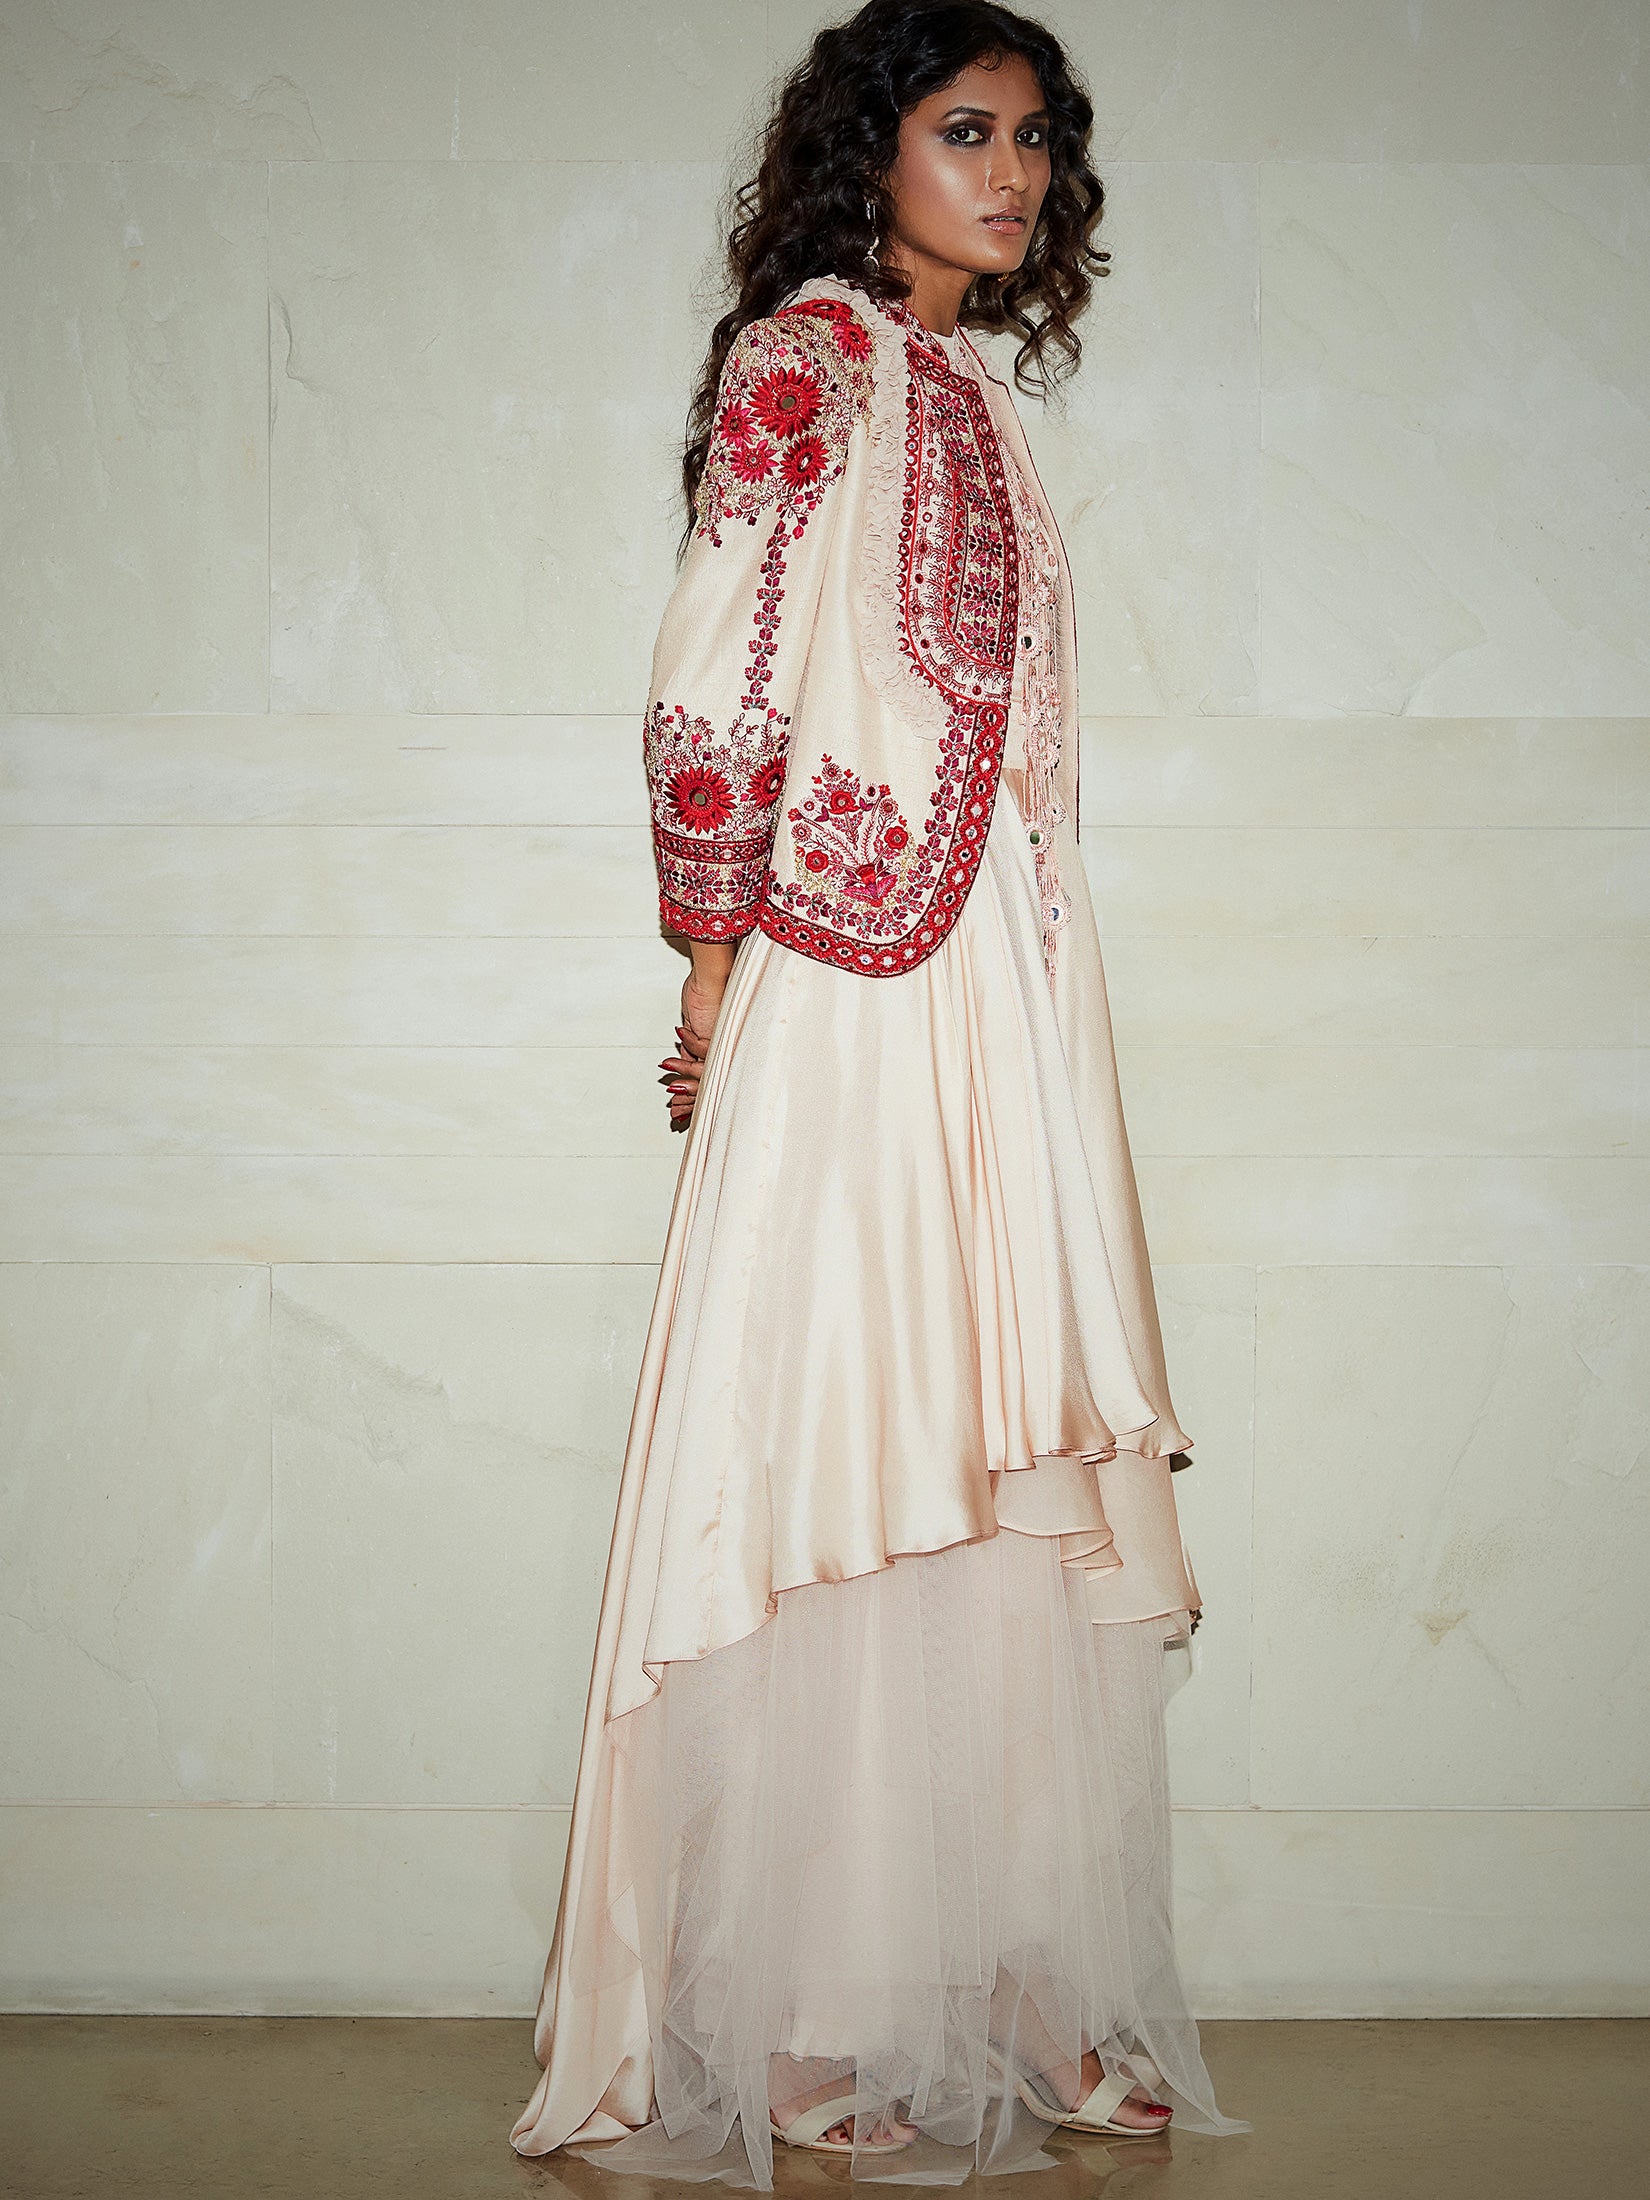 Contrast Cameo Pink Red Embroidered Jacket Paired With Satin Dress